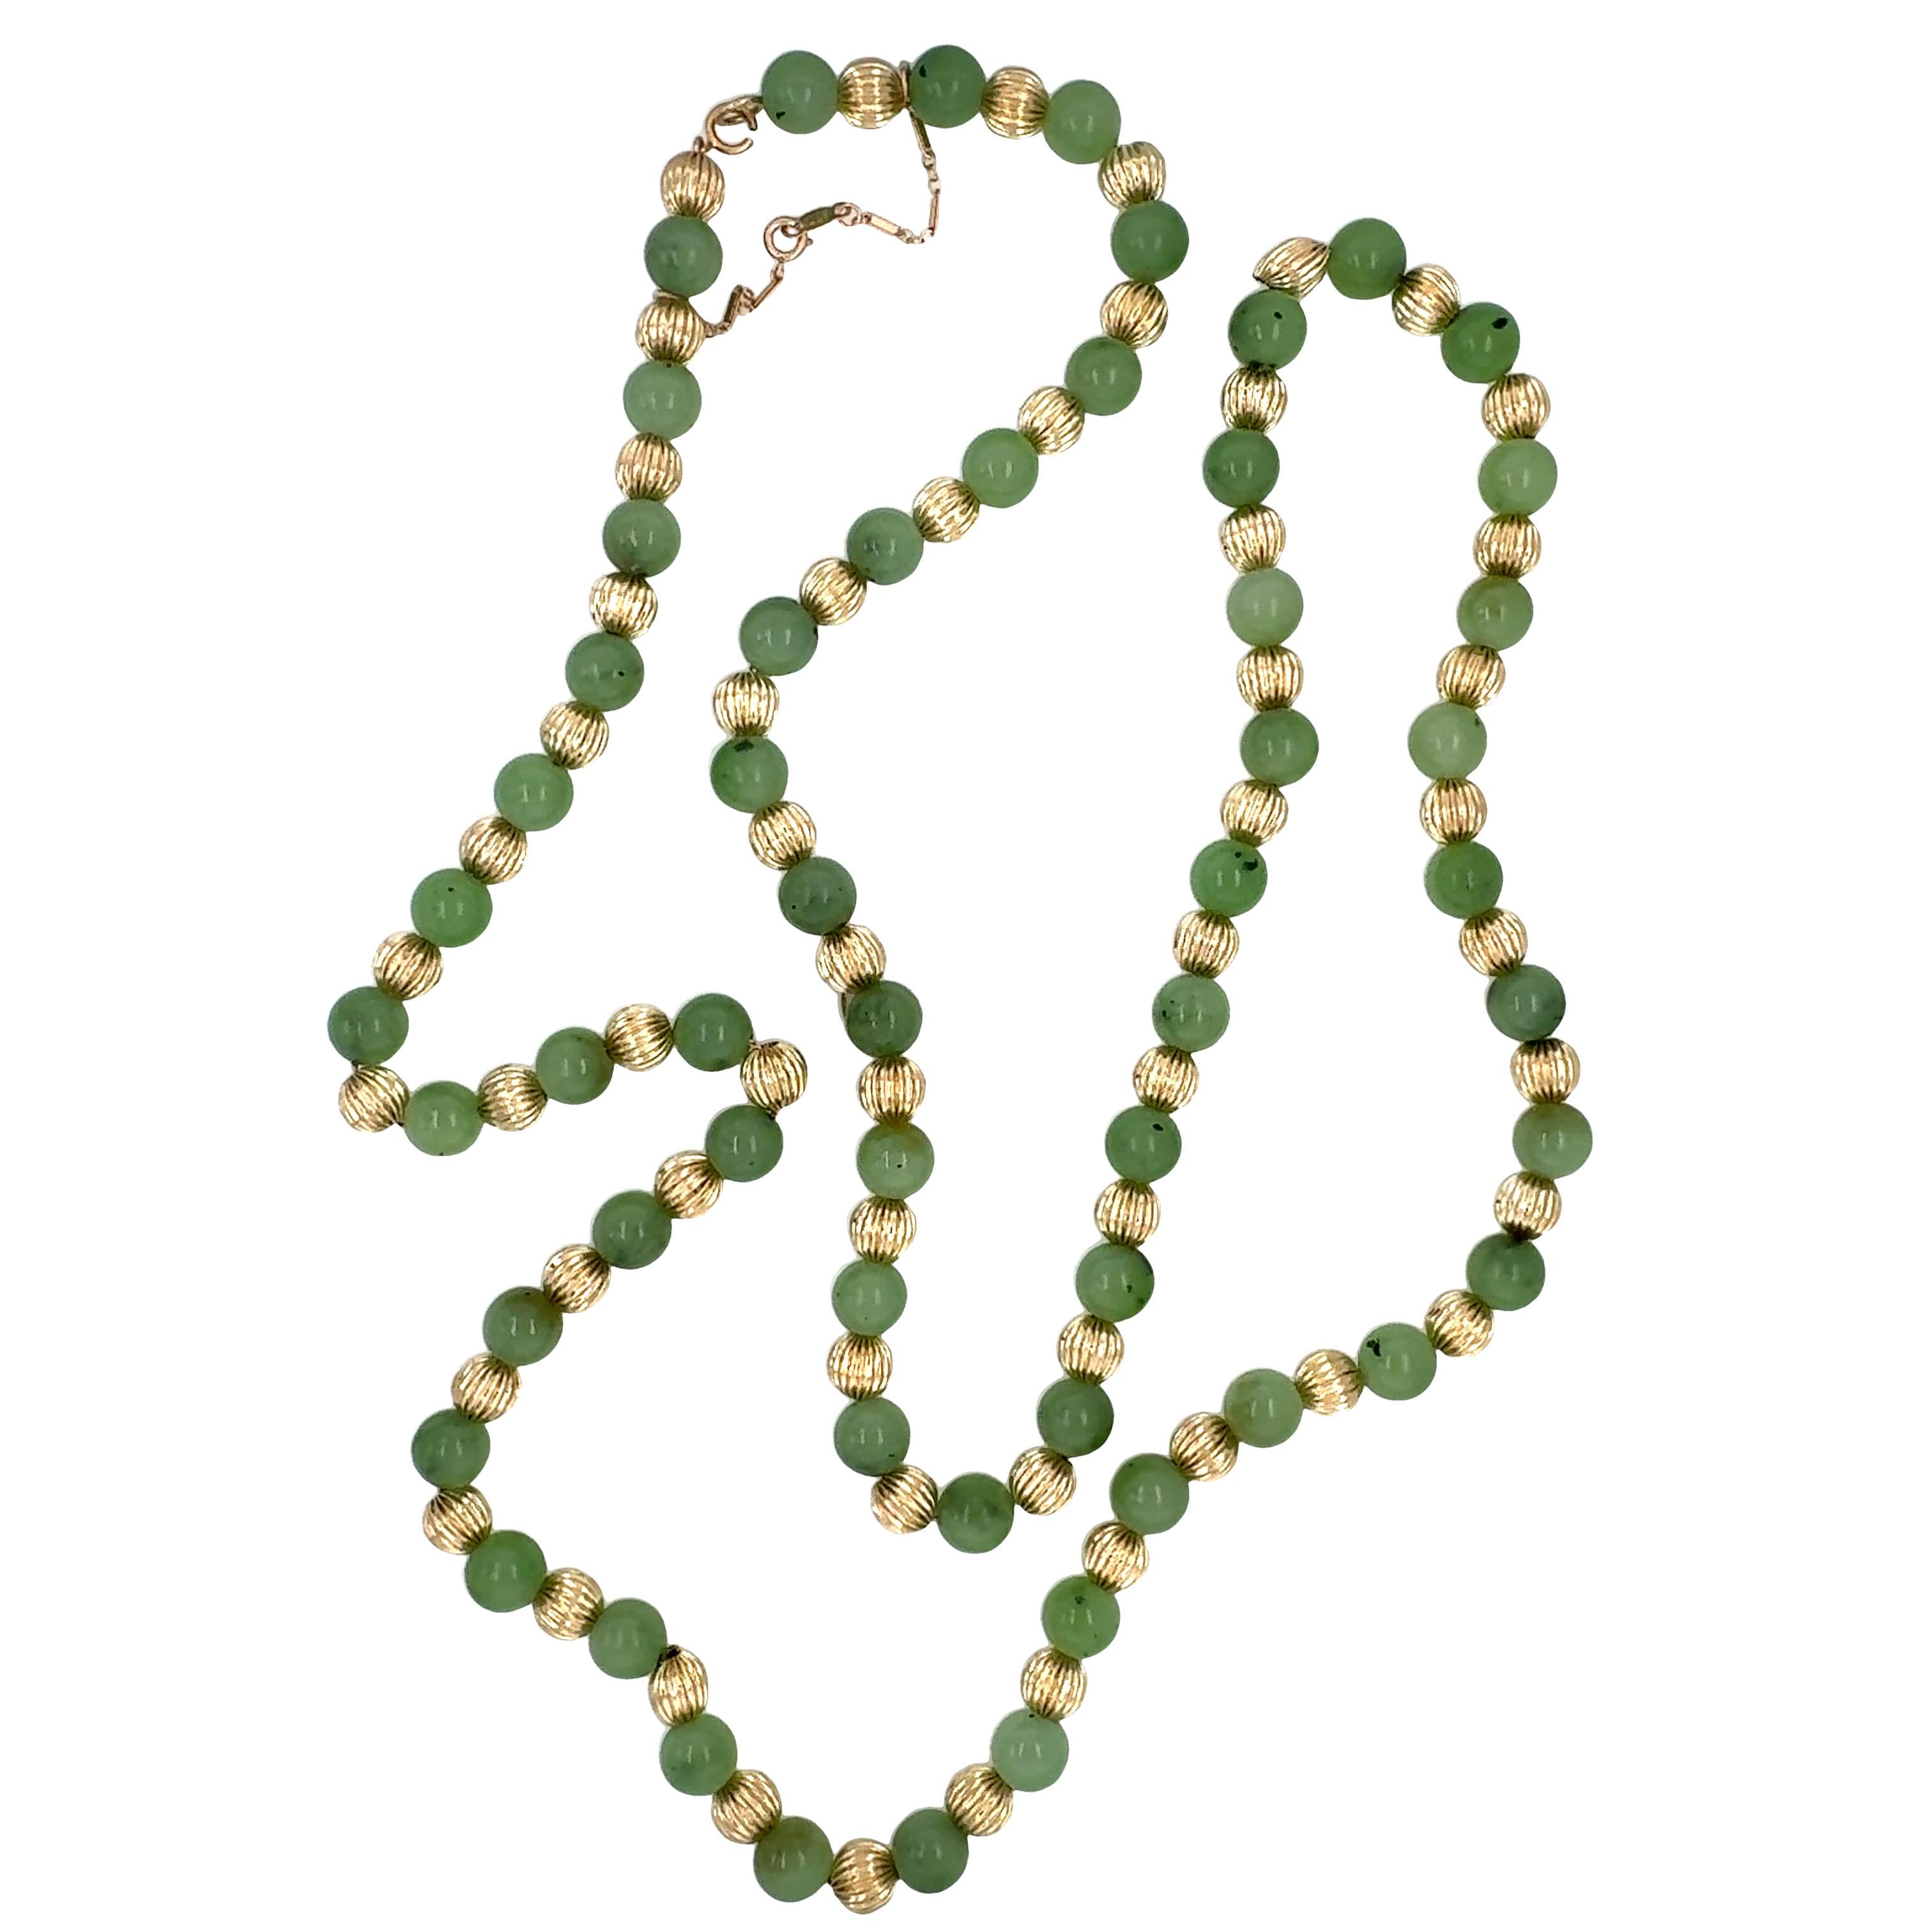 14K Yellow Gold Bead and Jade Bead Necklace